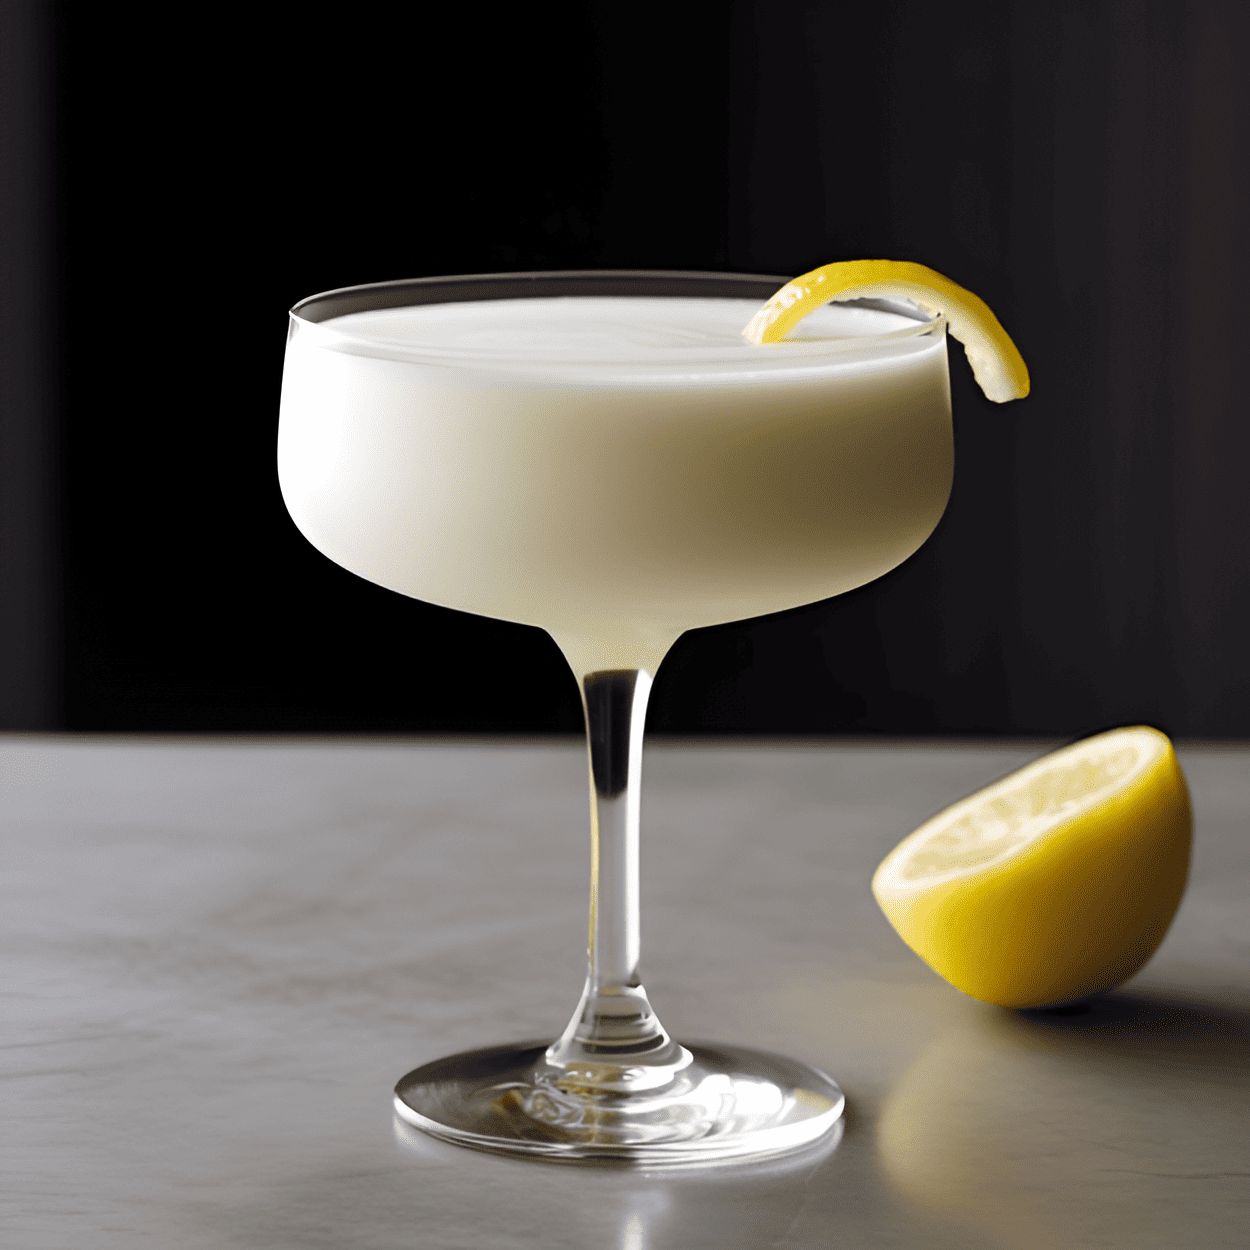 Tapeworm Recipe - The Tapeworm cocktail has a creamy, tangy taste with a hint of sweetness from the tequila. The mayonnaise adds a rich, velvety texture that is surprisingly pleasant. It's a strong cocktail with a distinct flavor profile.